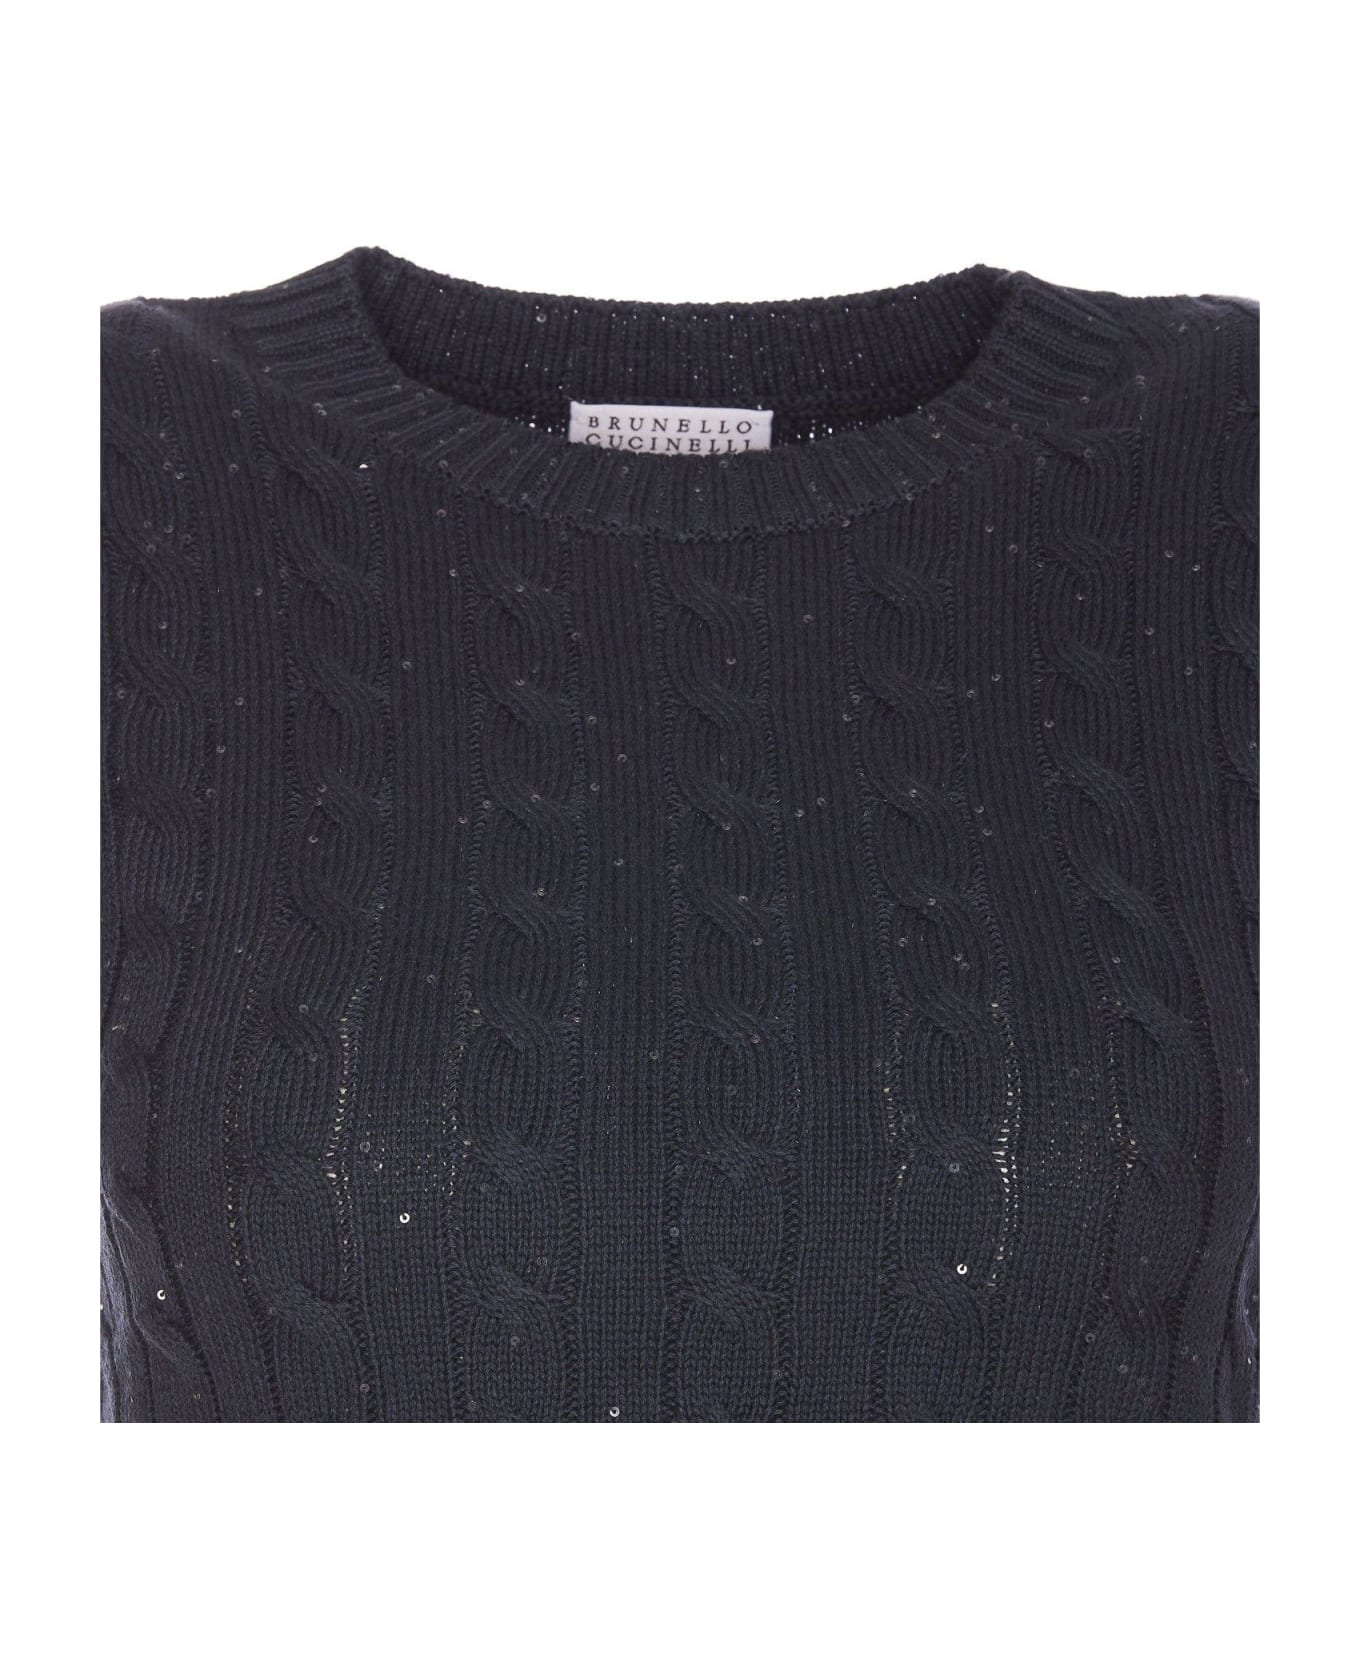 Brunello Cucinelli Sequin Embellished Cable-knitted Top - BLACK ベスト